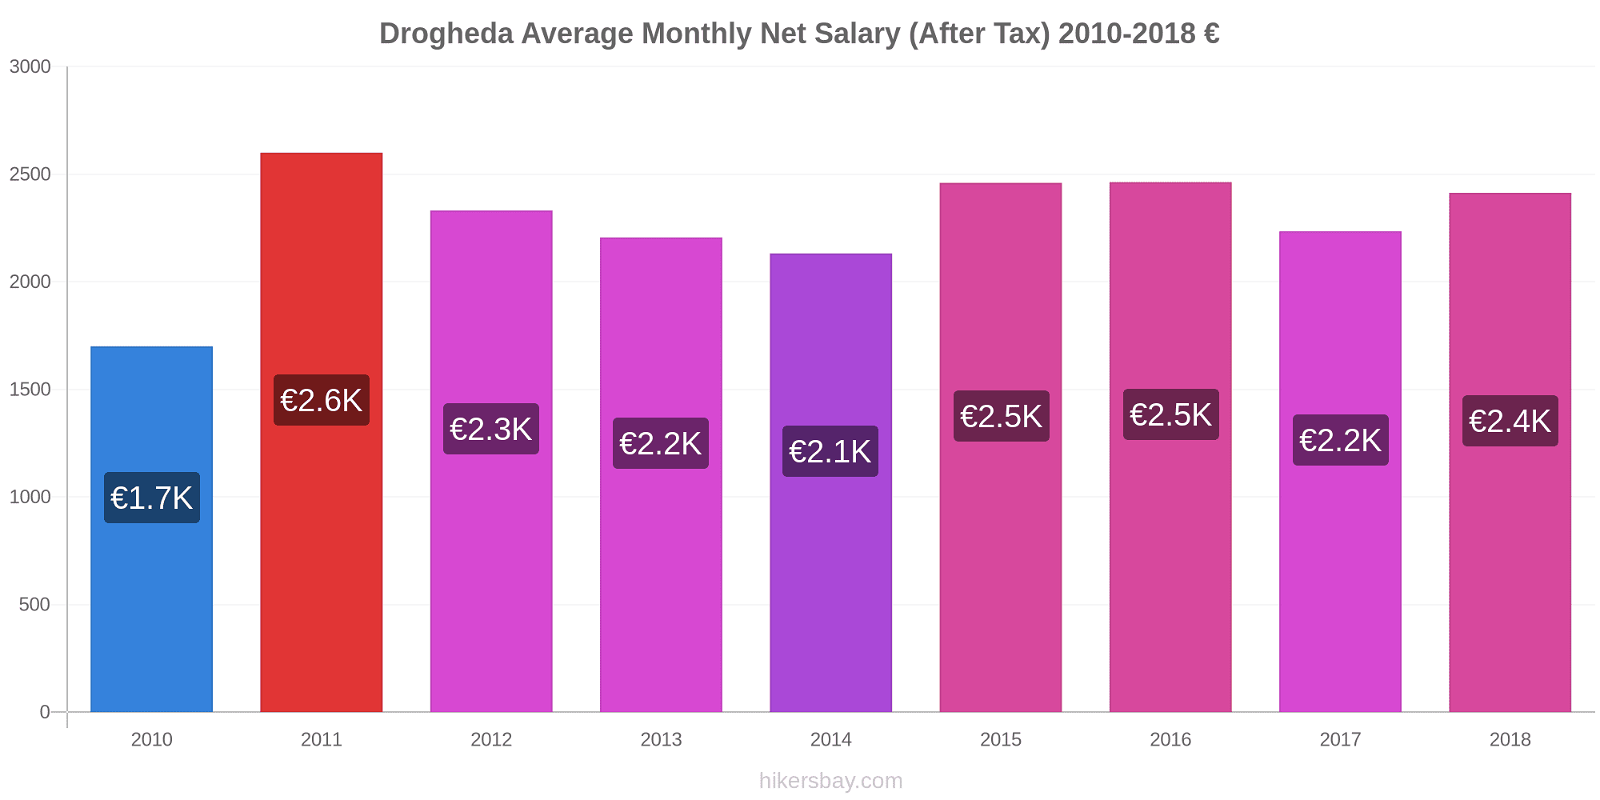 Drogheda price changes Average Monthly Net Salary (After Tax) hikersbay.com